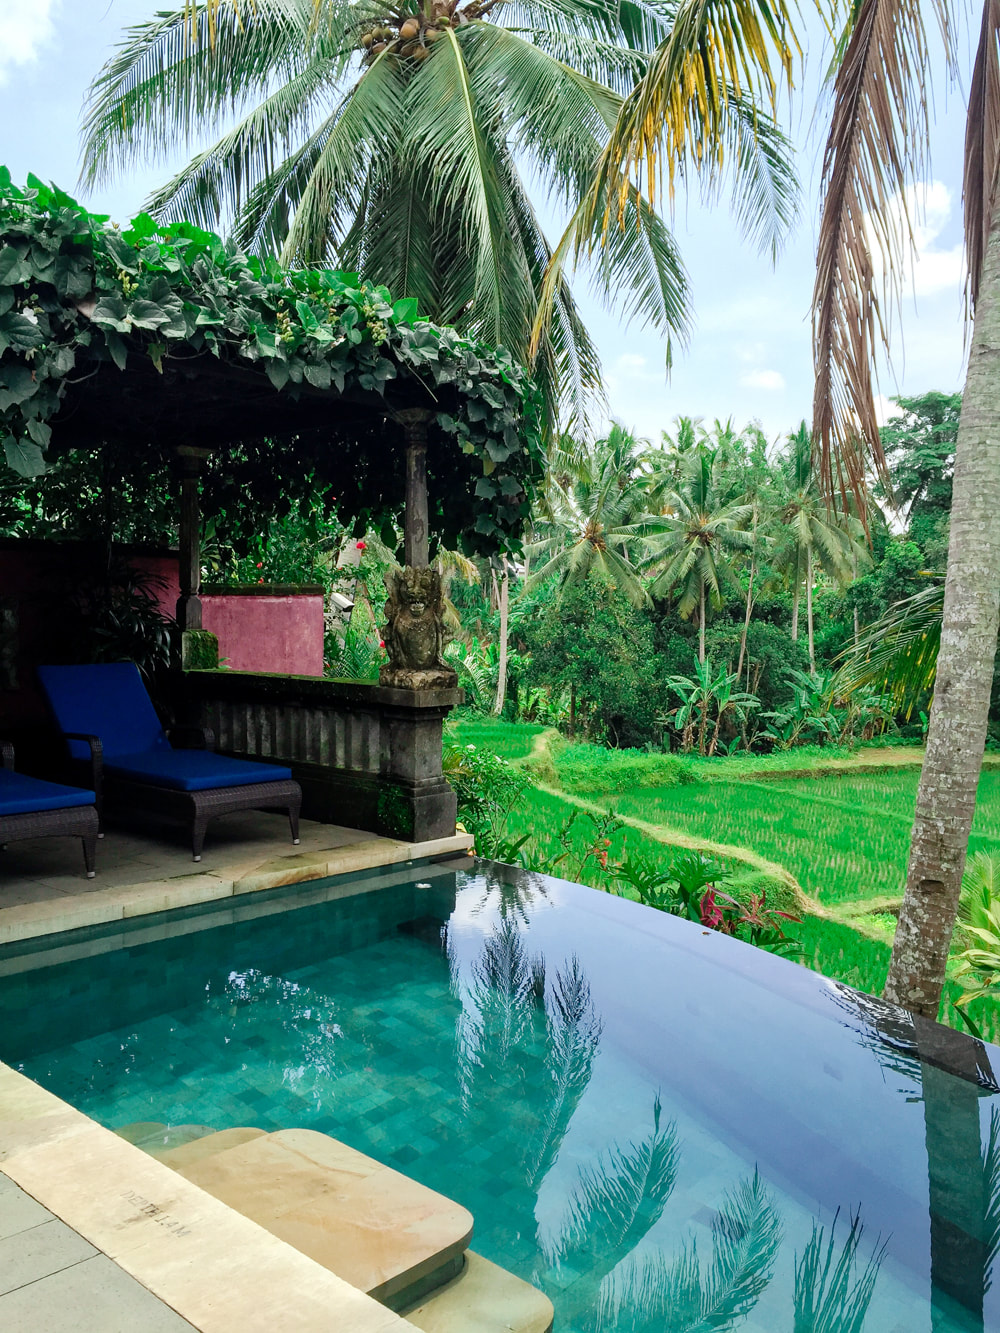 Private pool and seating area, over-looking the rice paddy field. Dwaraka, the Royal Villas, Ubud, Bali, Indonesia.